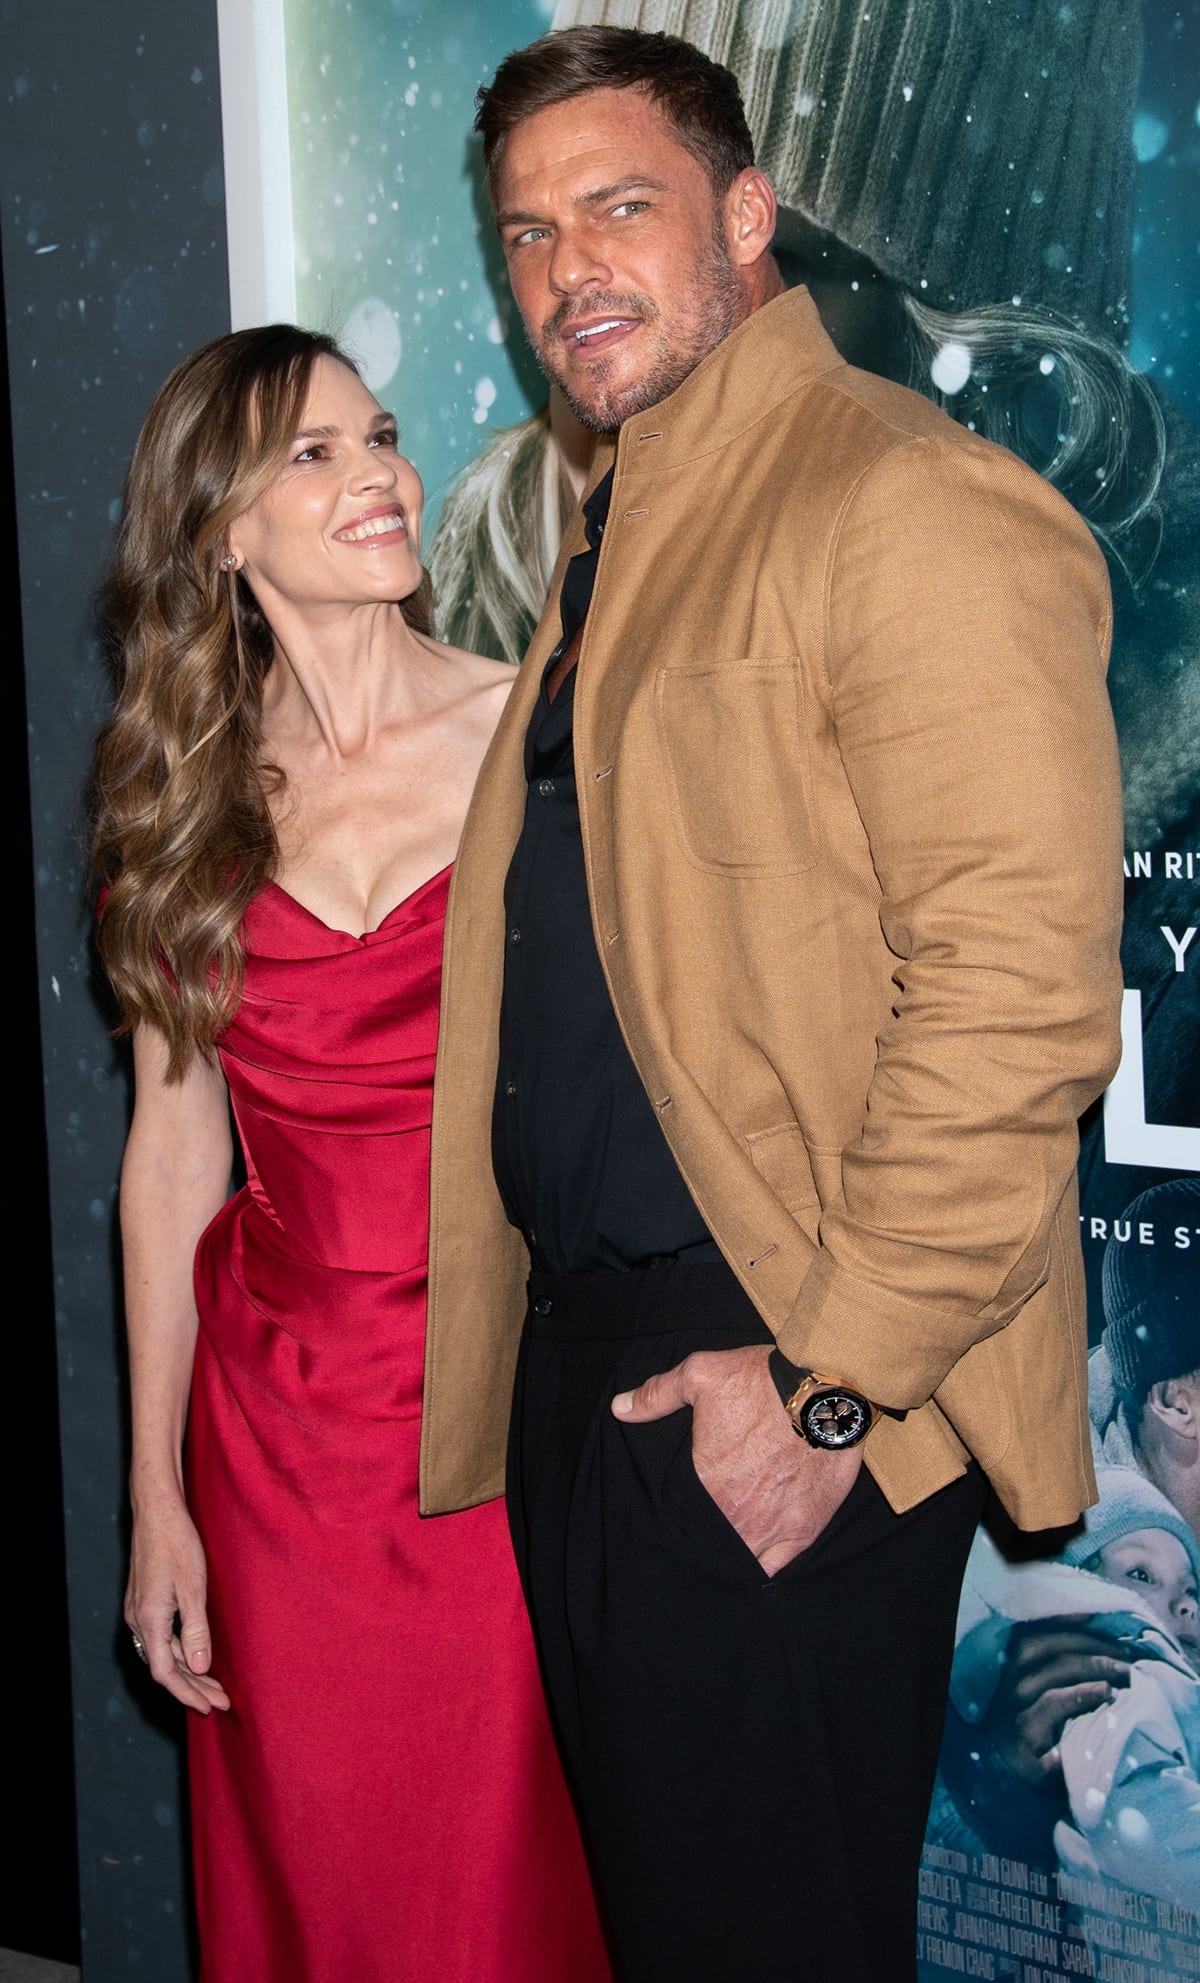 Alan Ritchson, towering at 6ft 2in (188 cm), exudes charm beside a comparatively petite Hilary Swank, who stands at 5ft 6in (167.6 cm), both making a striking pair at the 'Ordinary Angels' premiere in New York City, with Ritchson in a stylish camel blazer and black shirt at the SVA Theater